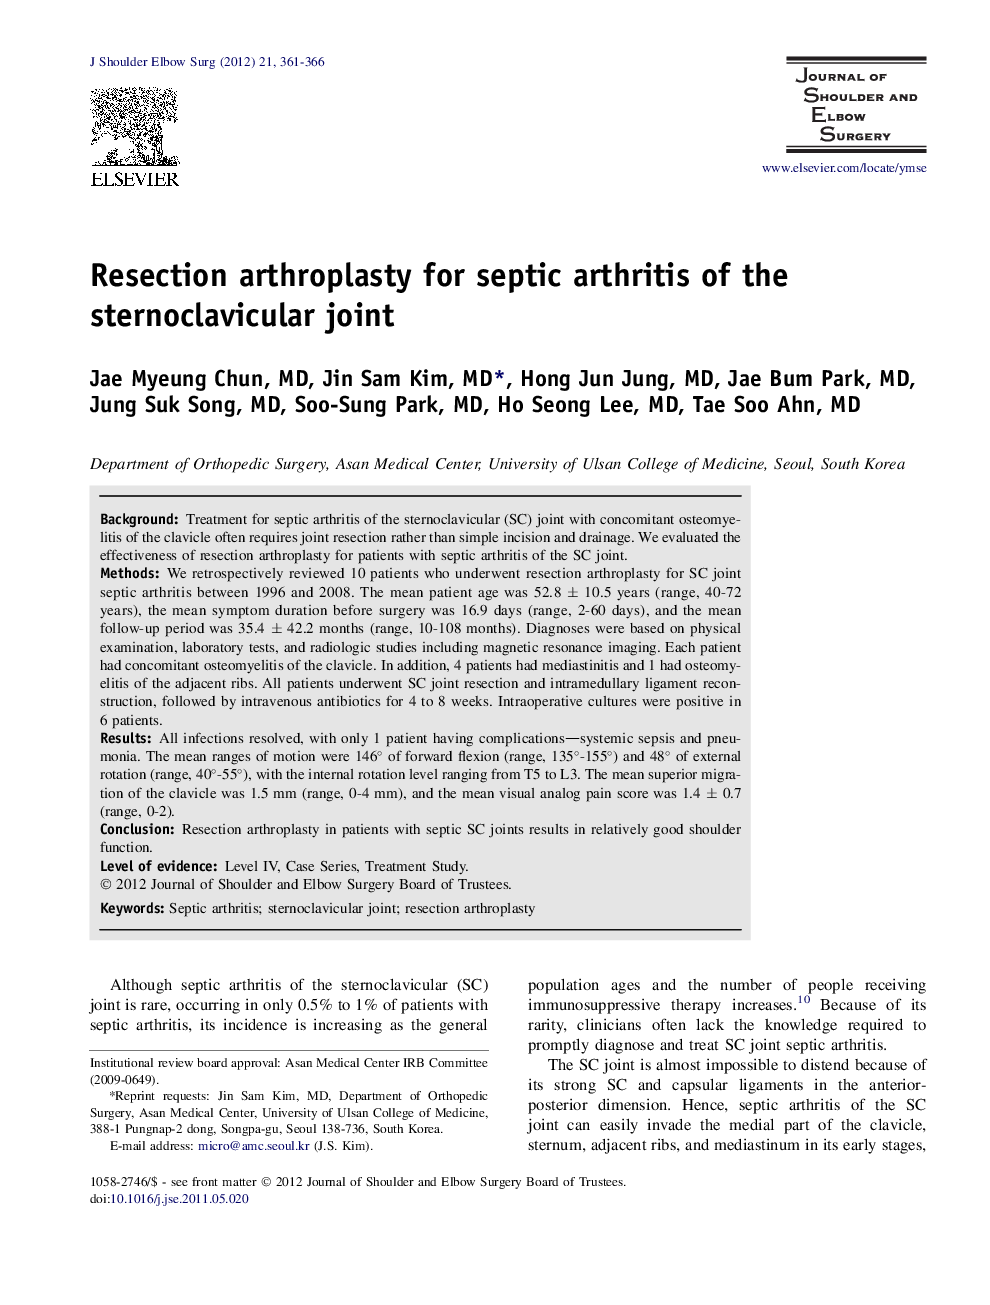 Resection arthroplasty for septic arthritis of the sternoclavicular joint 